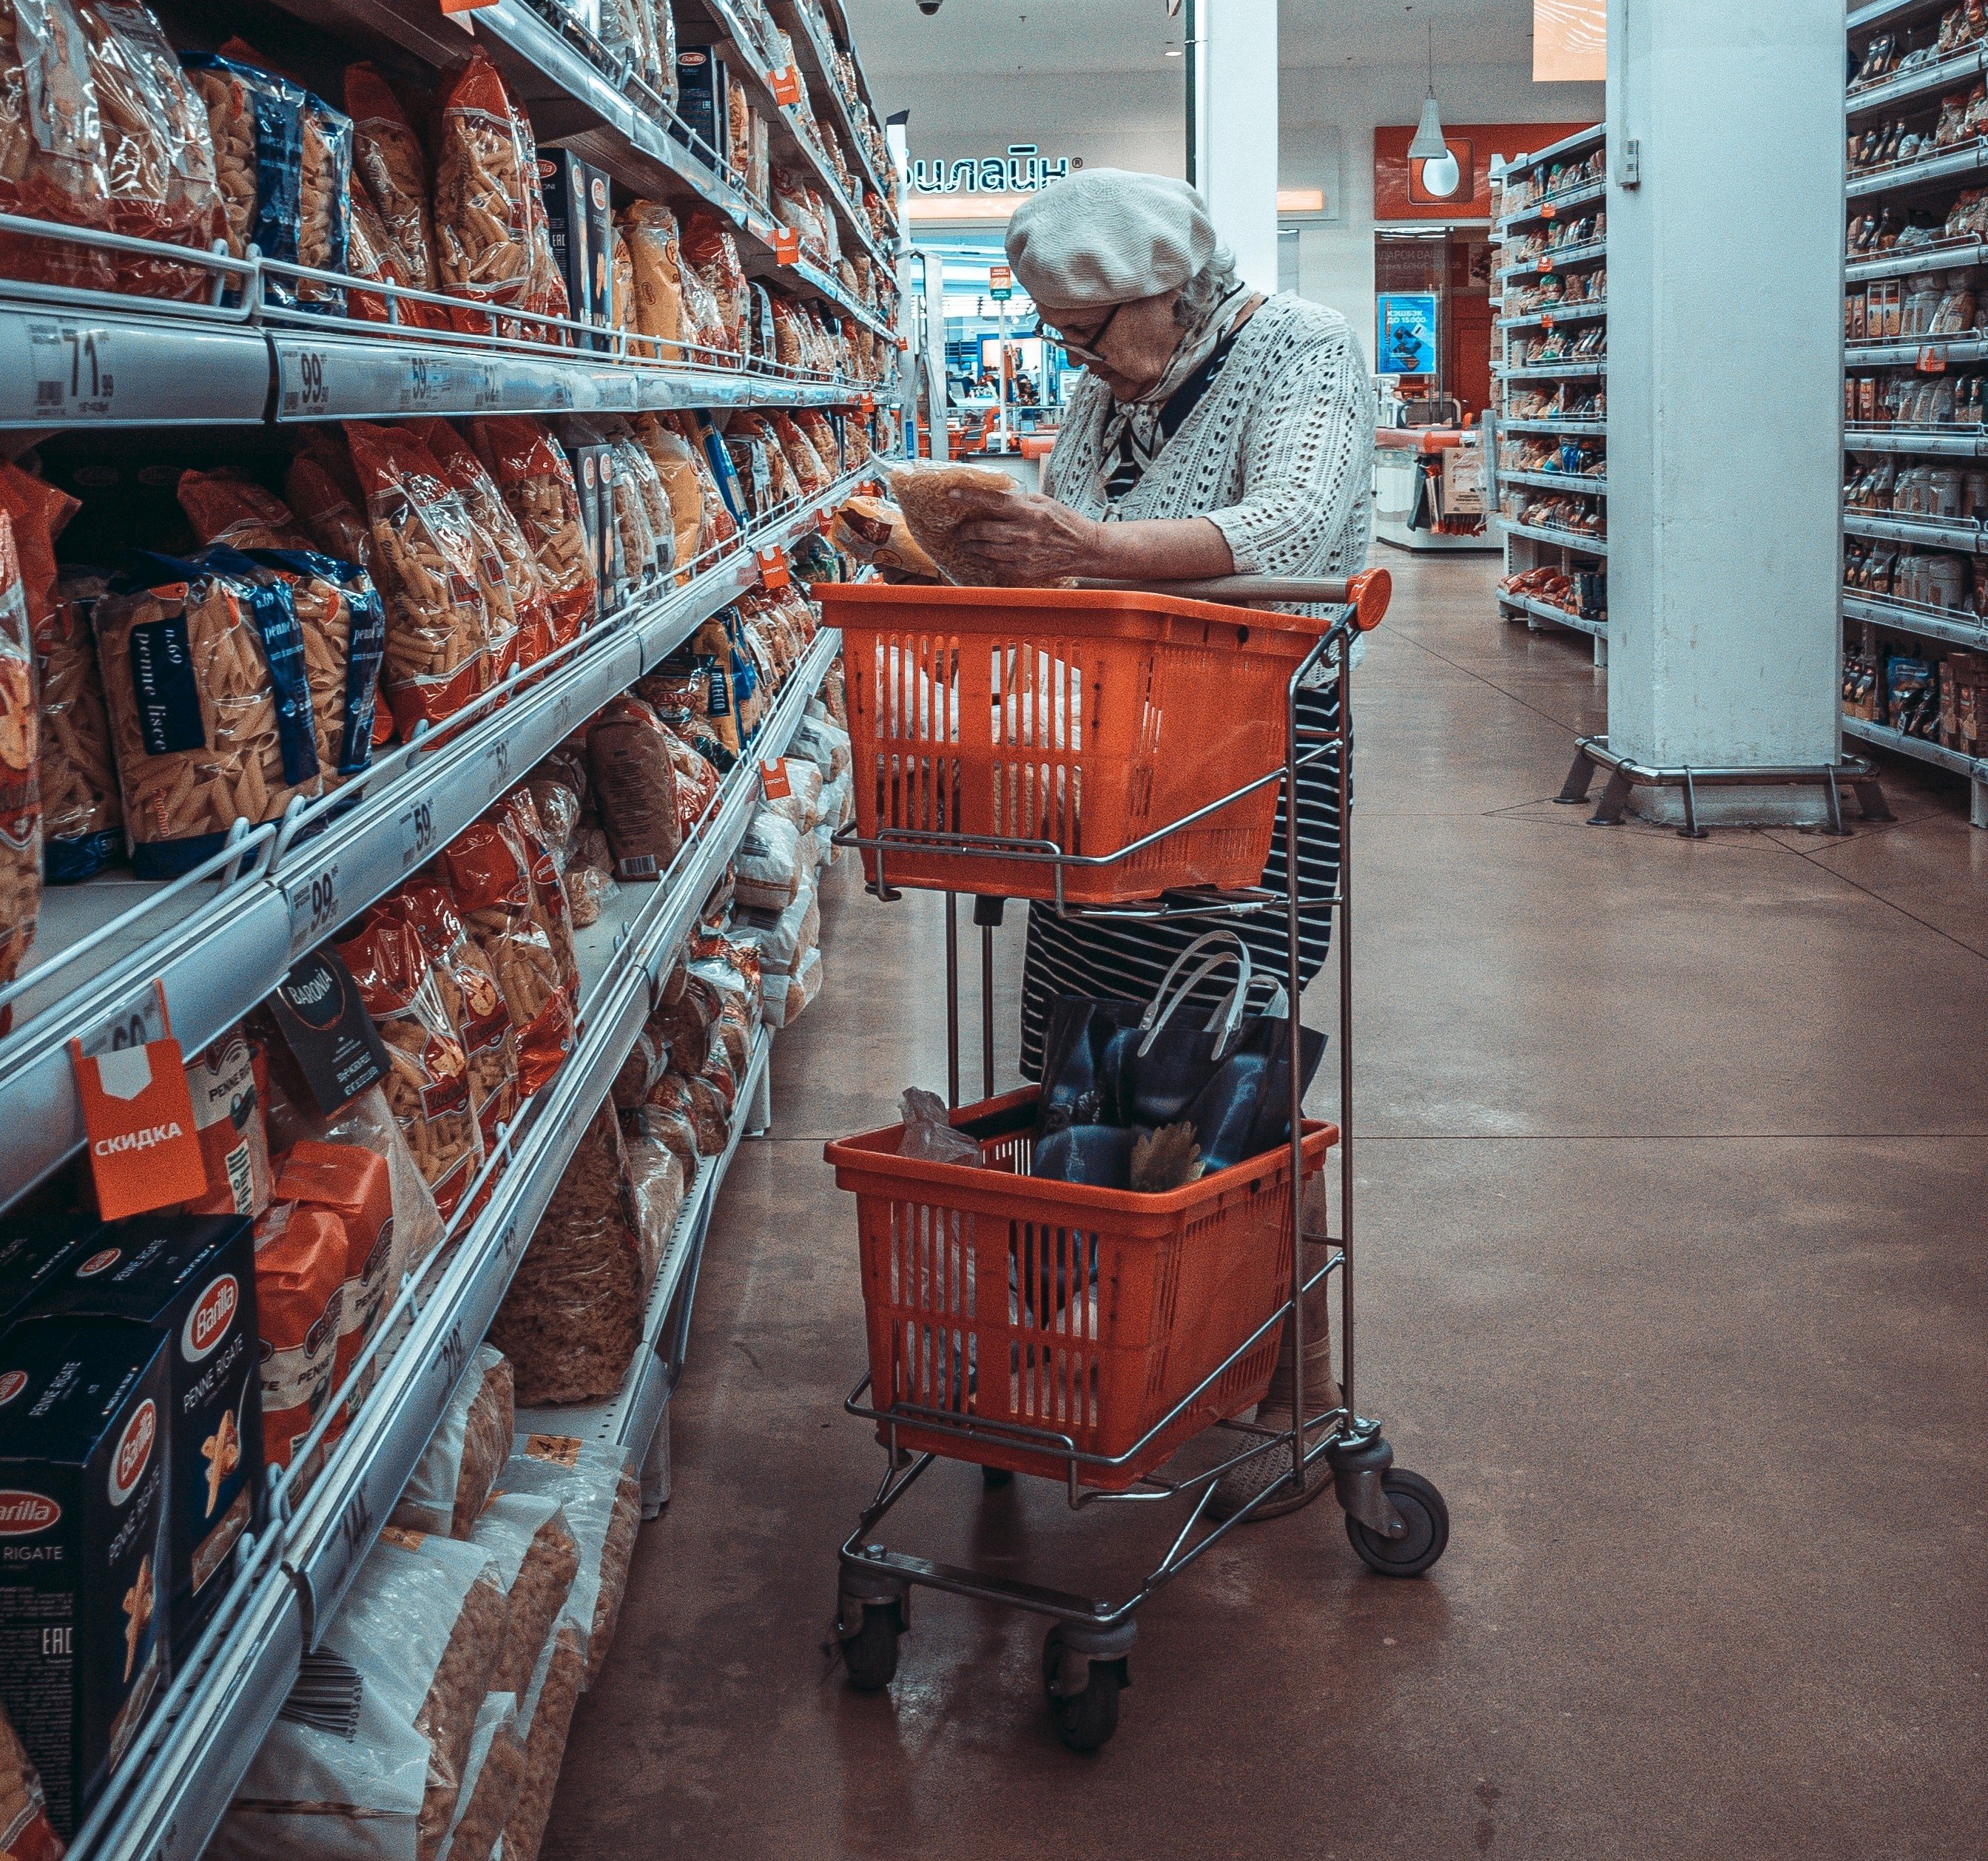 Henry paid for the old lady's groceries. | Source: Unsplash